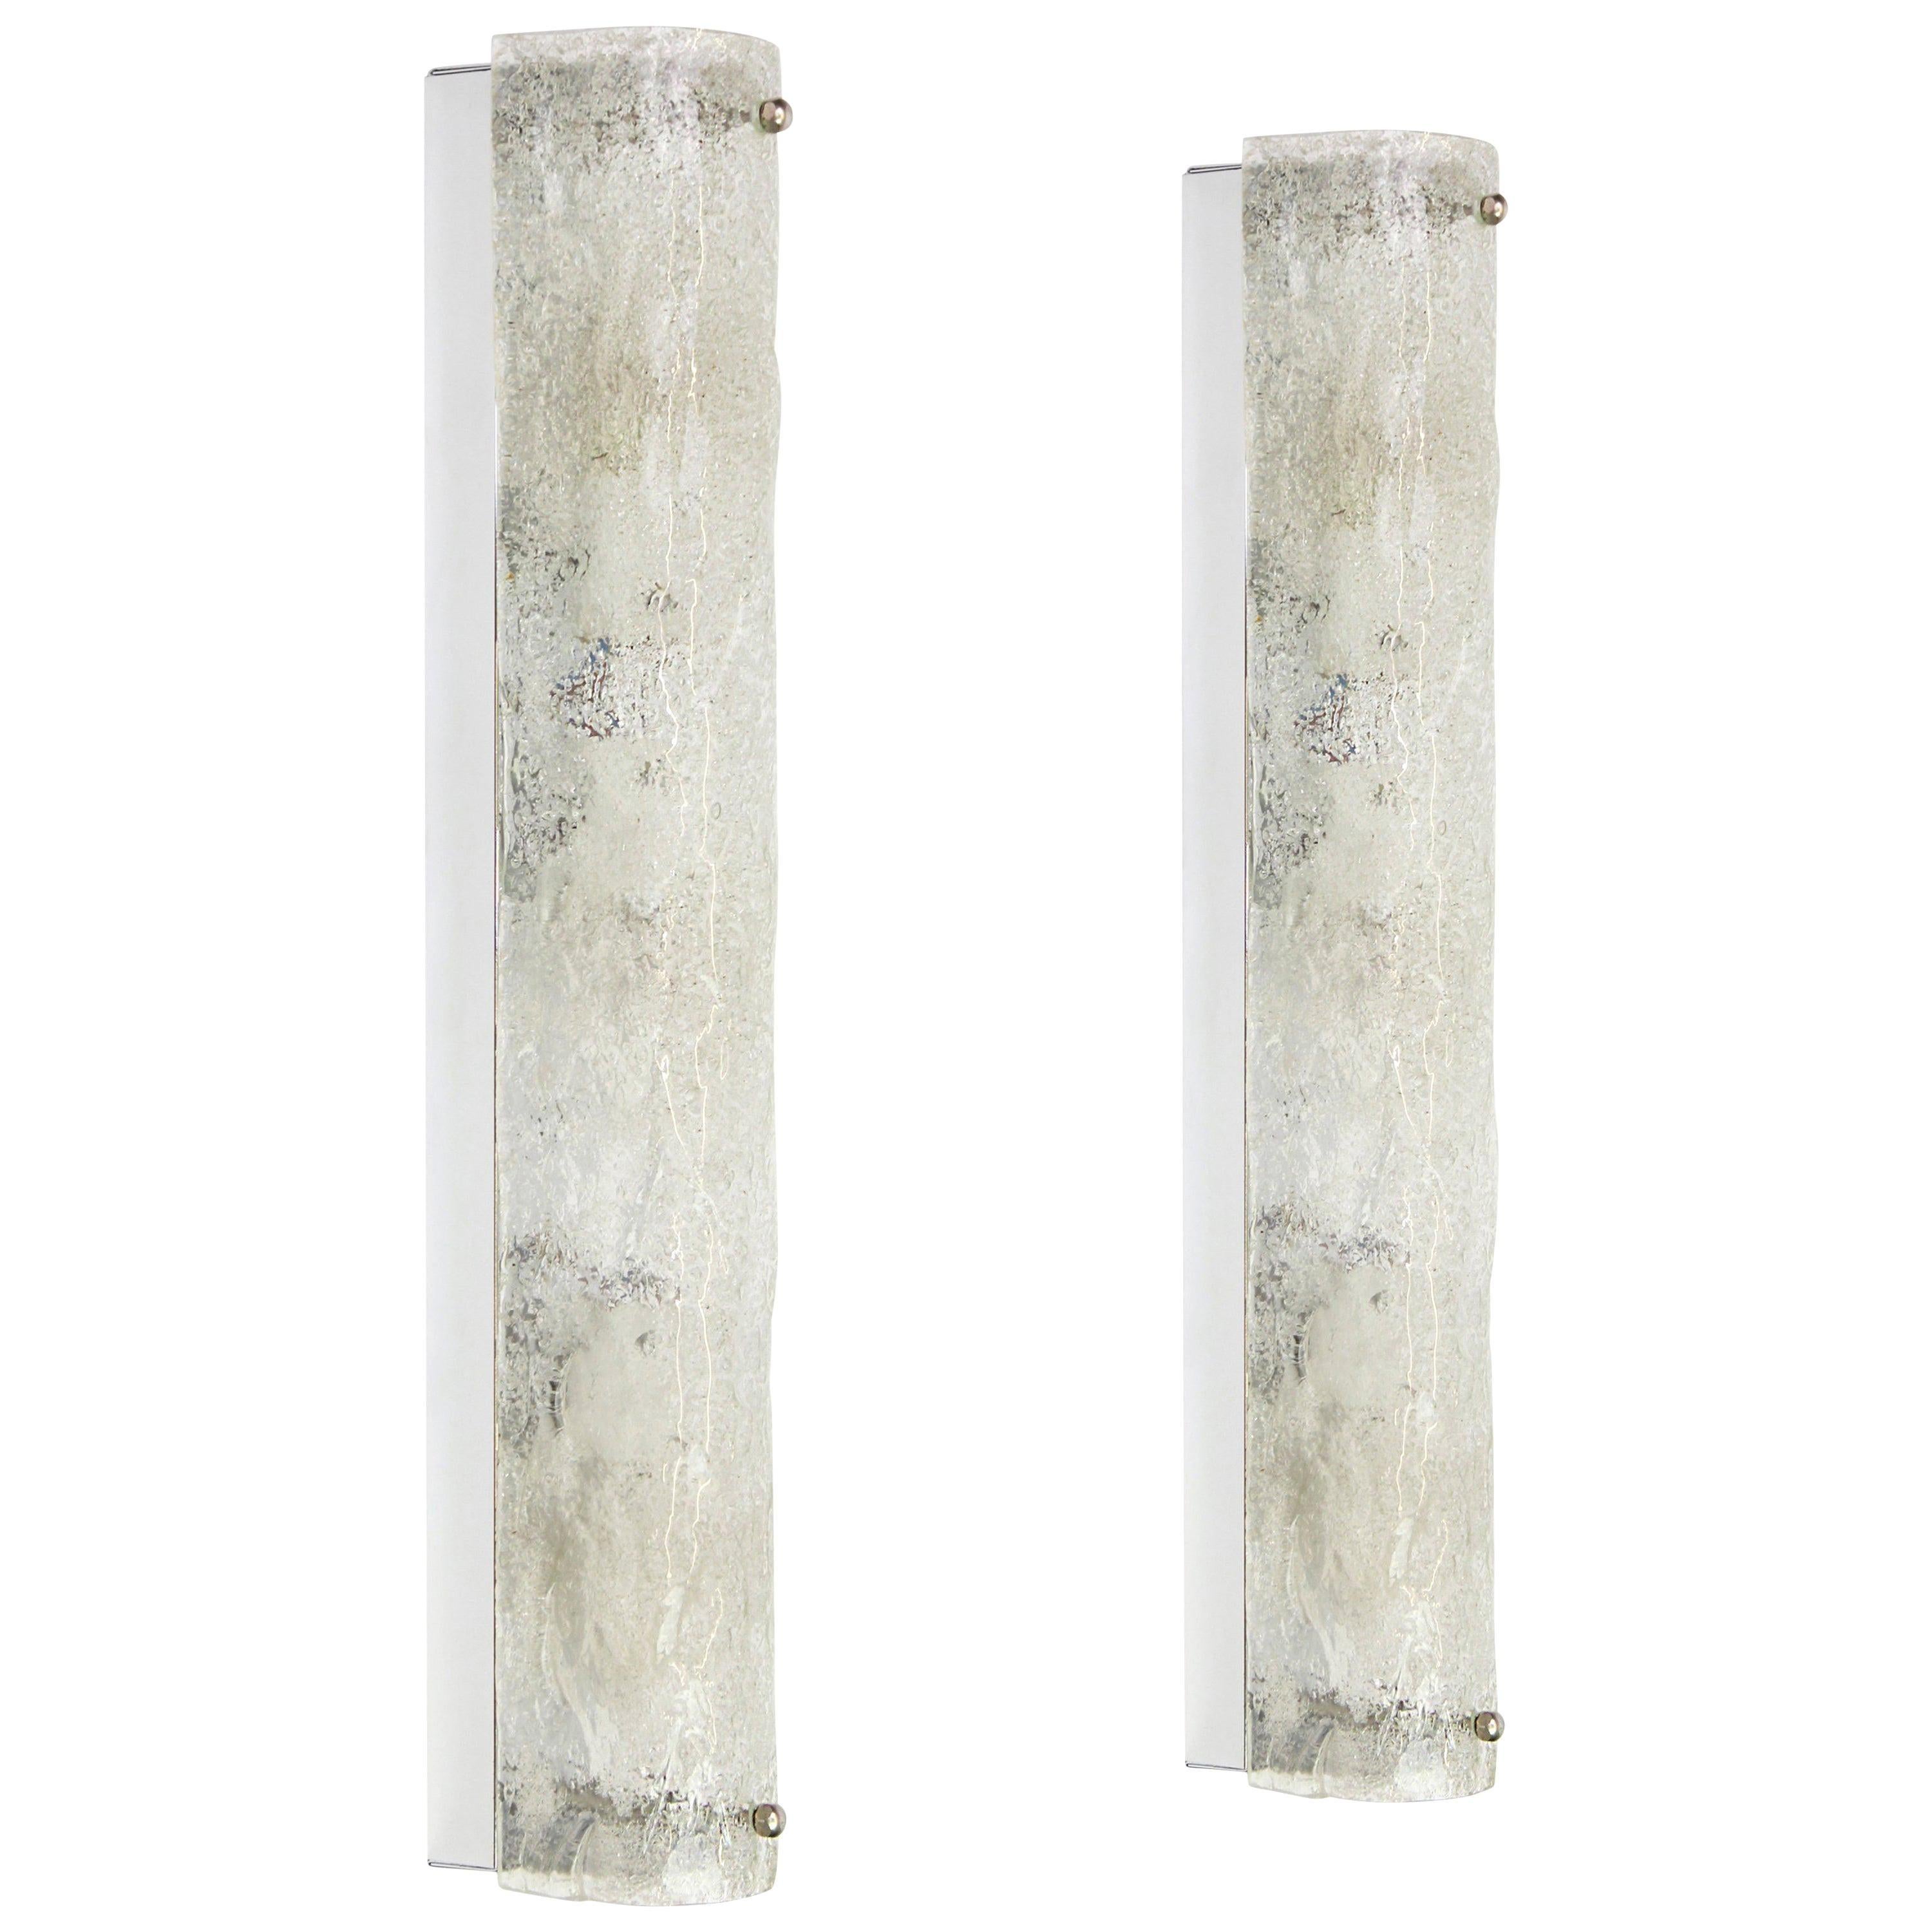 Pair of large handcrafted murano glass on a chromed base sconces by Hillebrand, Germany, circa 1960s.

It consists of textured quality clear crystal tubular shade simulating ice on a chrome frame.
The design allows this light to be placed either